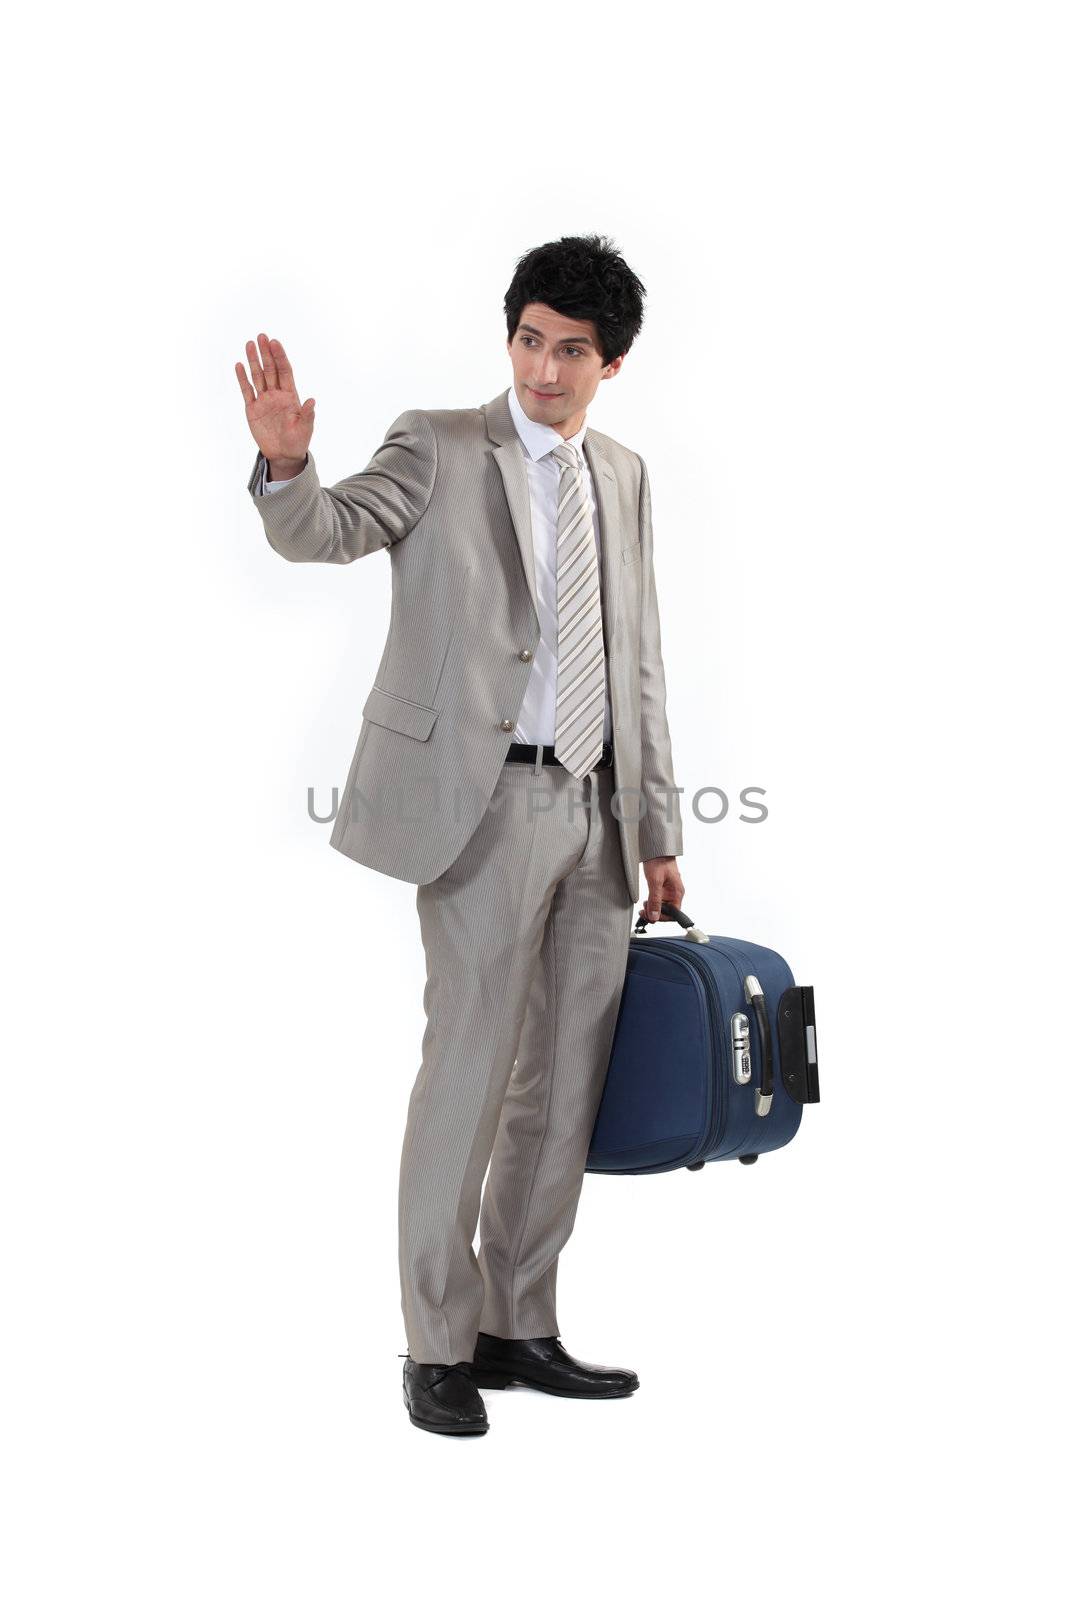 Man with suitcase waving goodbye